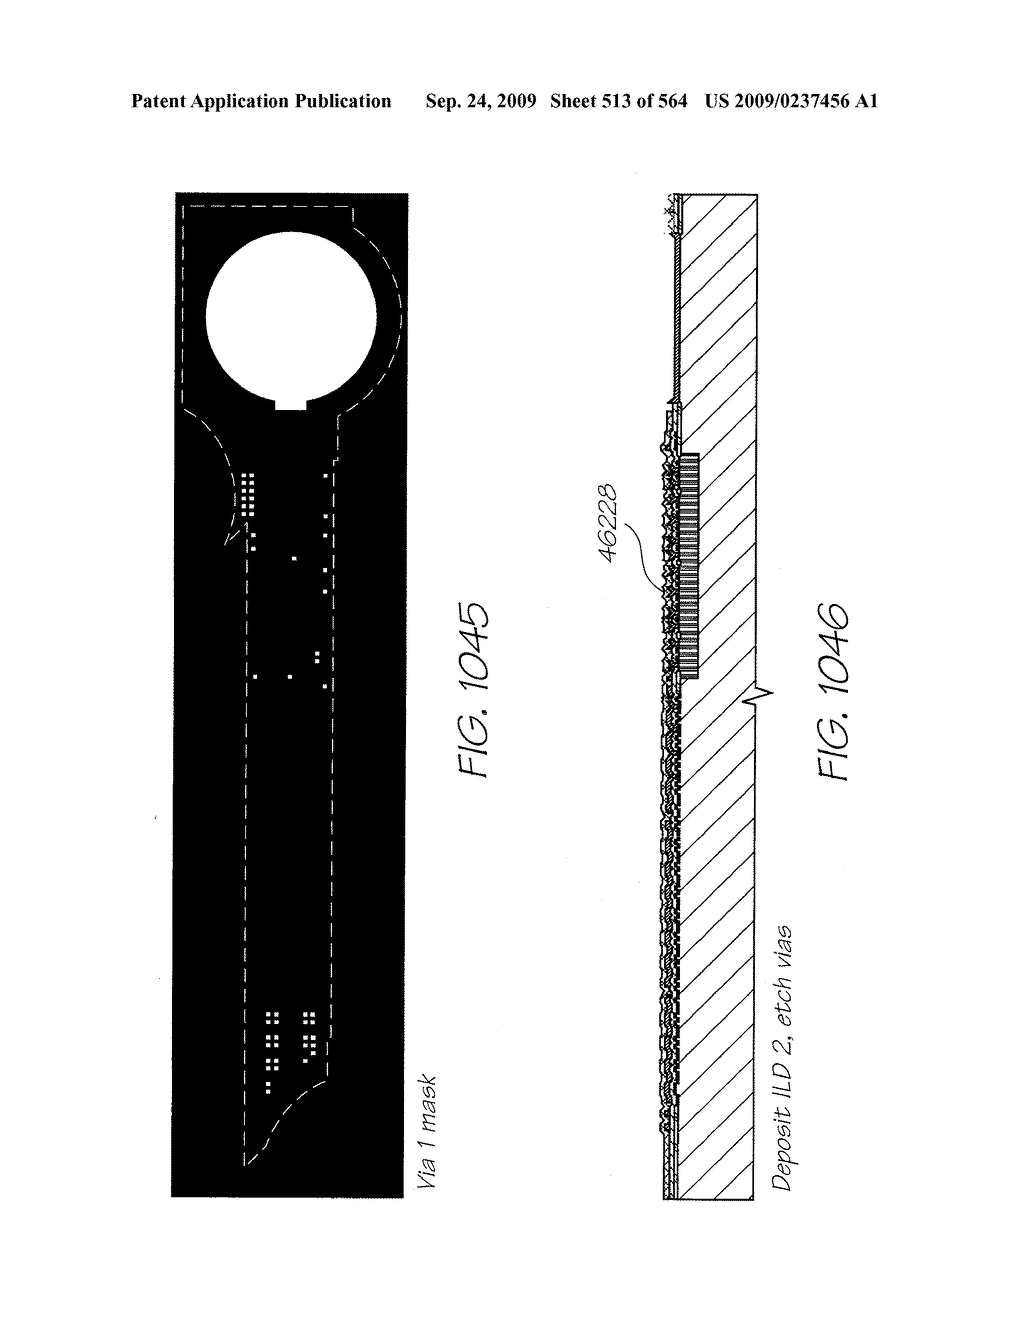 Inkjet Printhead With Paddle For Ejecting Ink From One Of Two Nozzles - diagram, schematic, and image 514